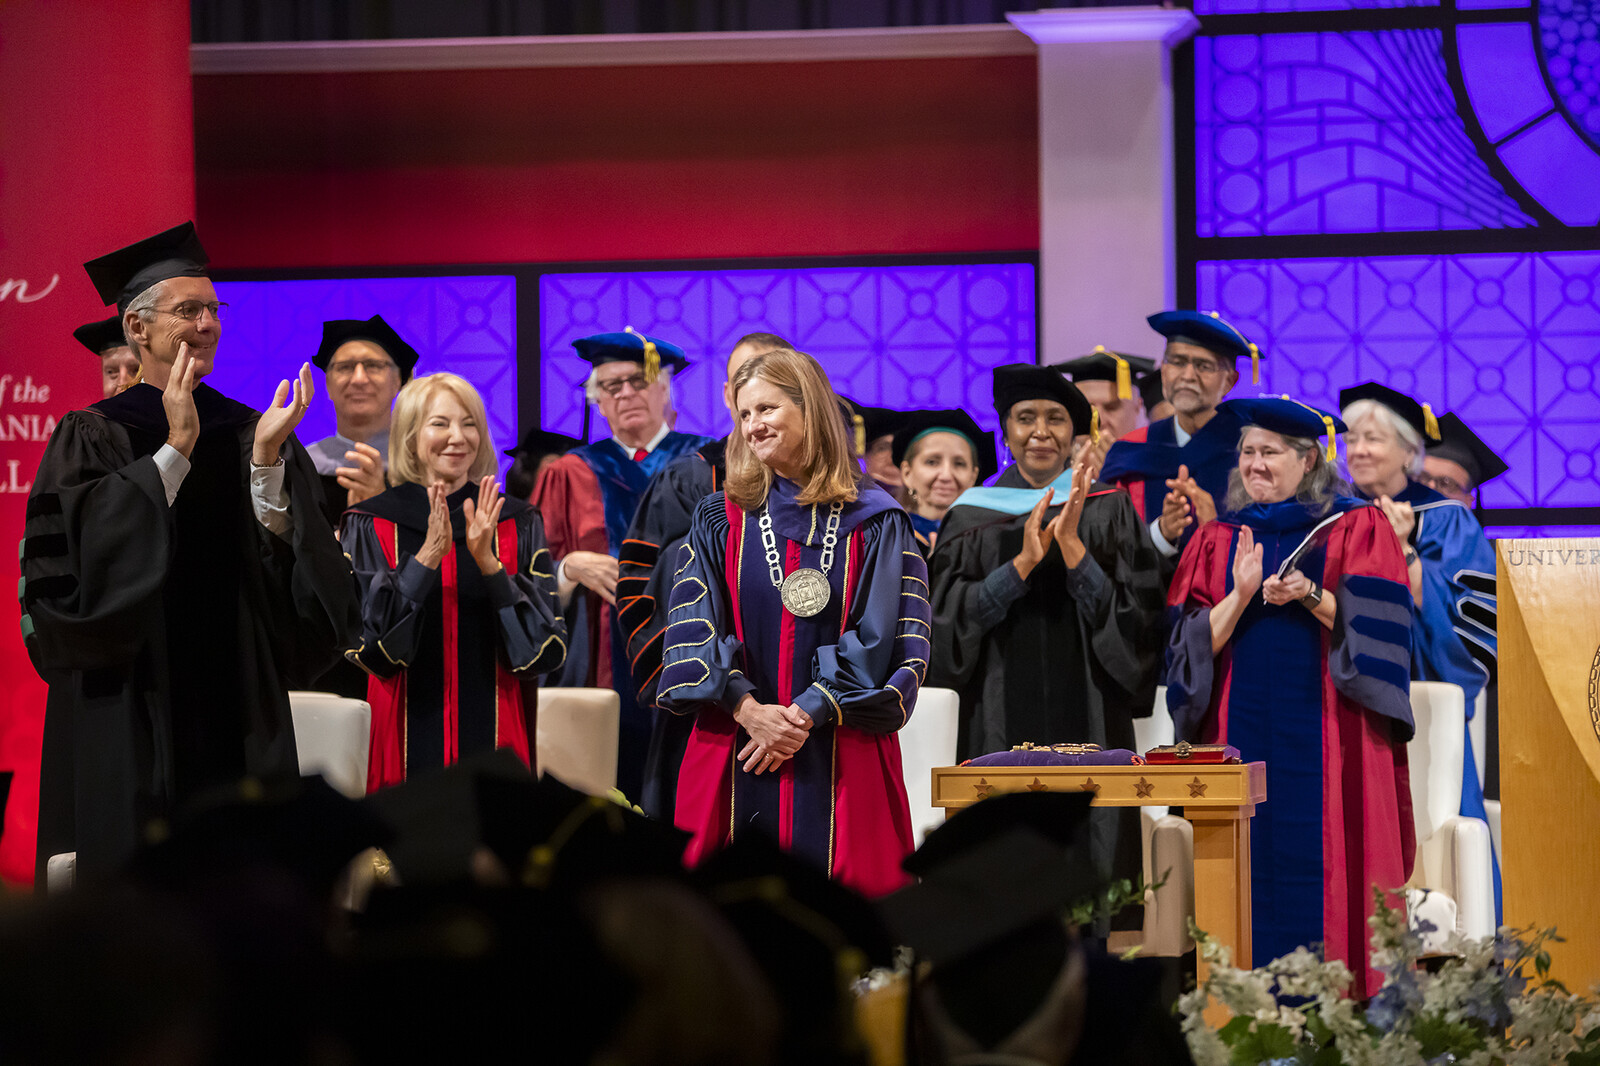 Board Chair Scott Bok, former President Gutmann, Deans of the 12 schools and other academic dignitaries applaud as President Magill is officially announced as Penn's 9th president